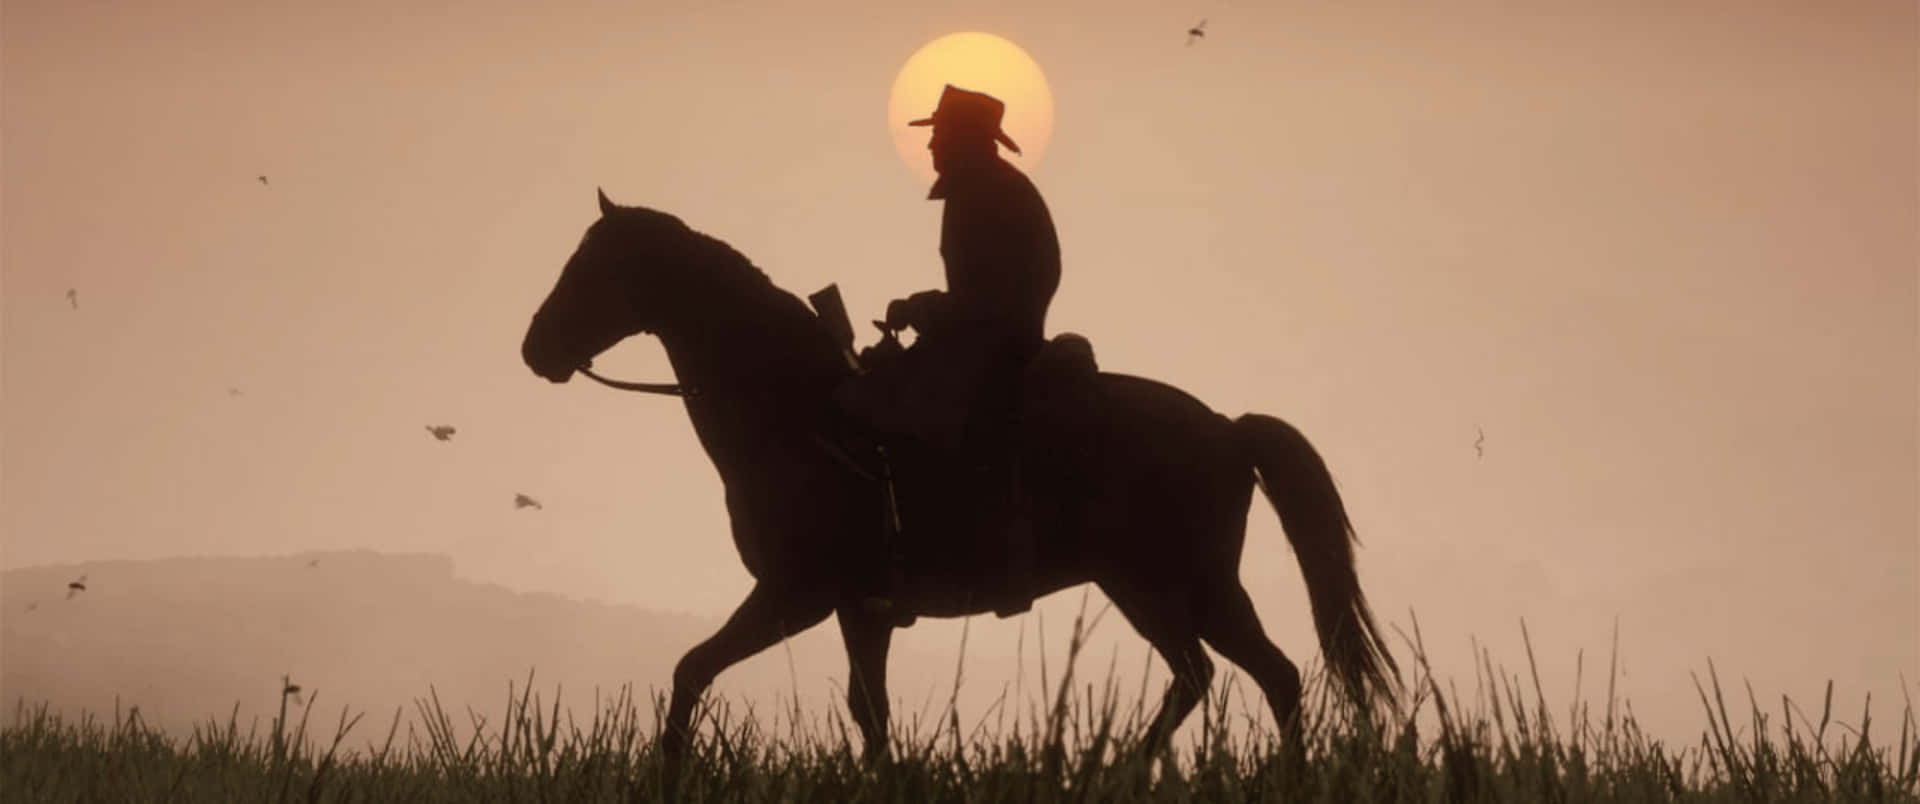 3440x1440p Red Dead Redemption 2 Background Move